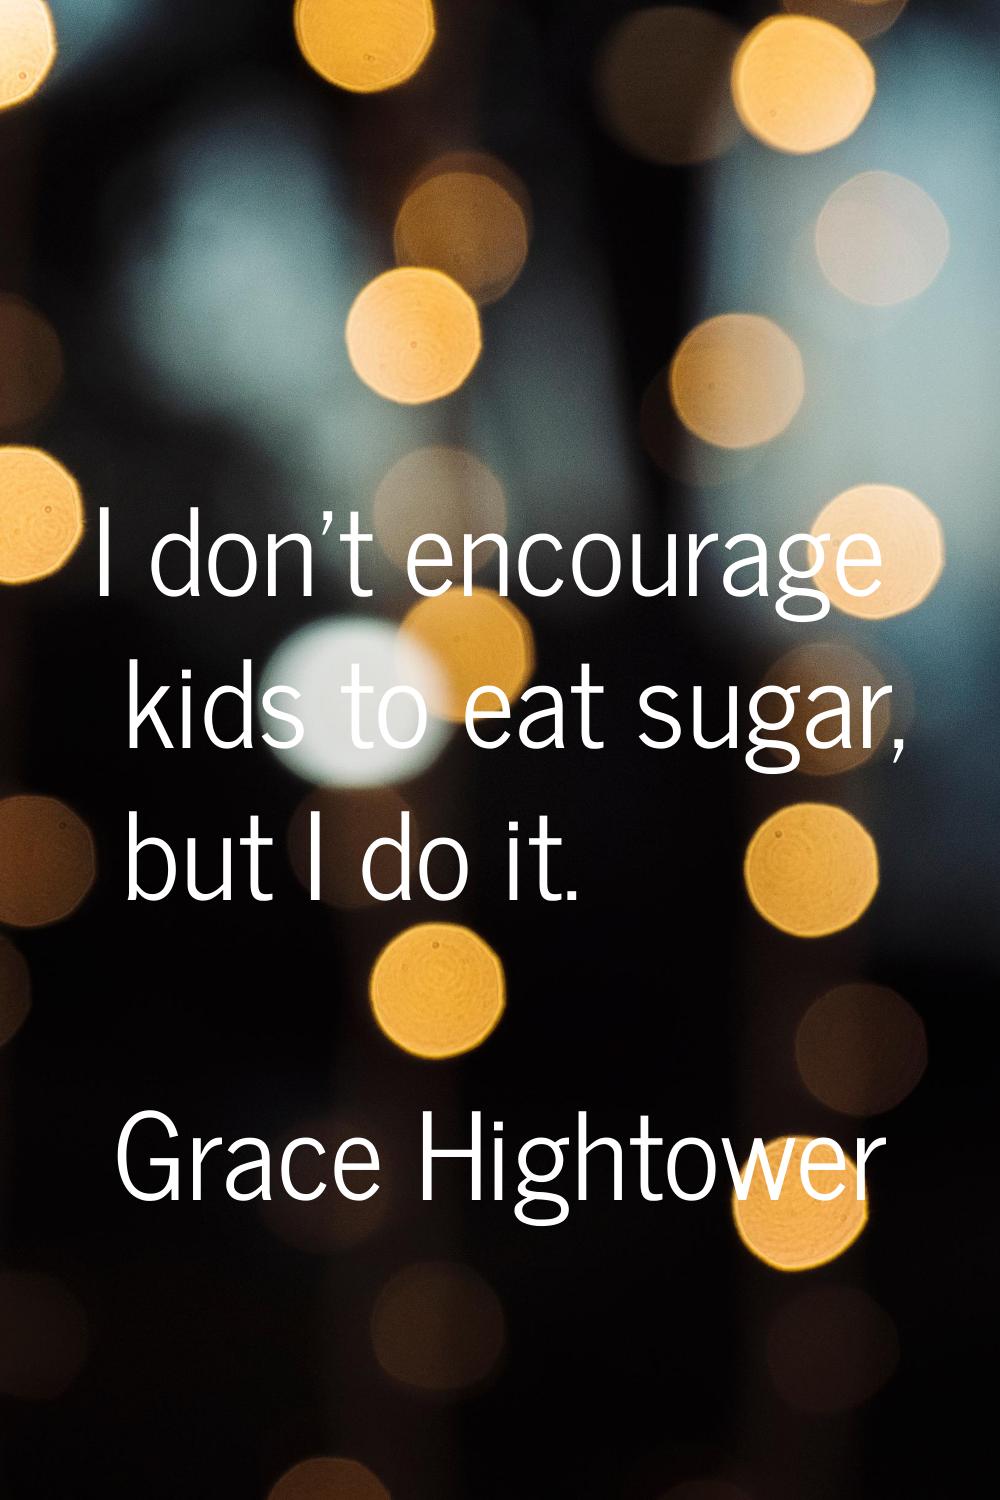 I don't encourage kids to eat sugar, but I do it.